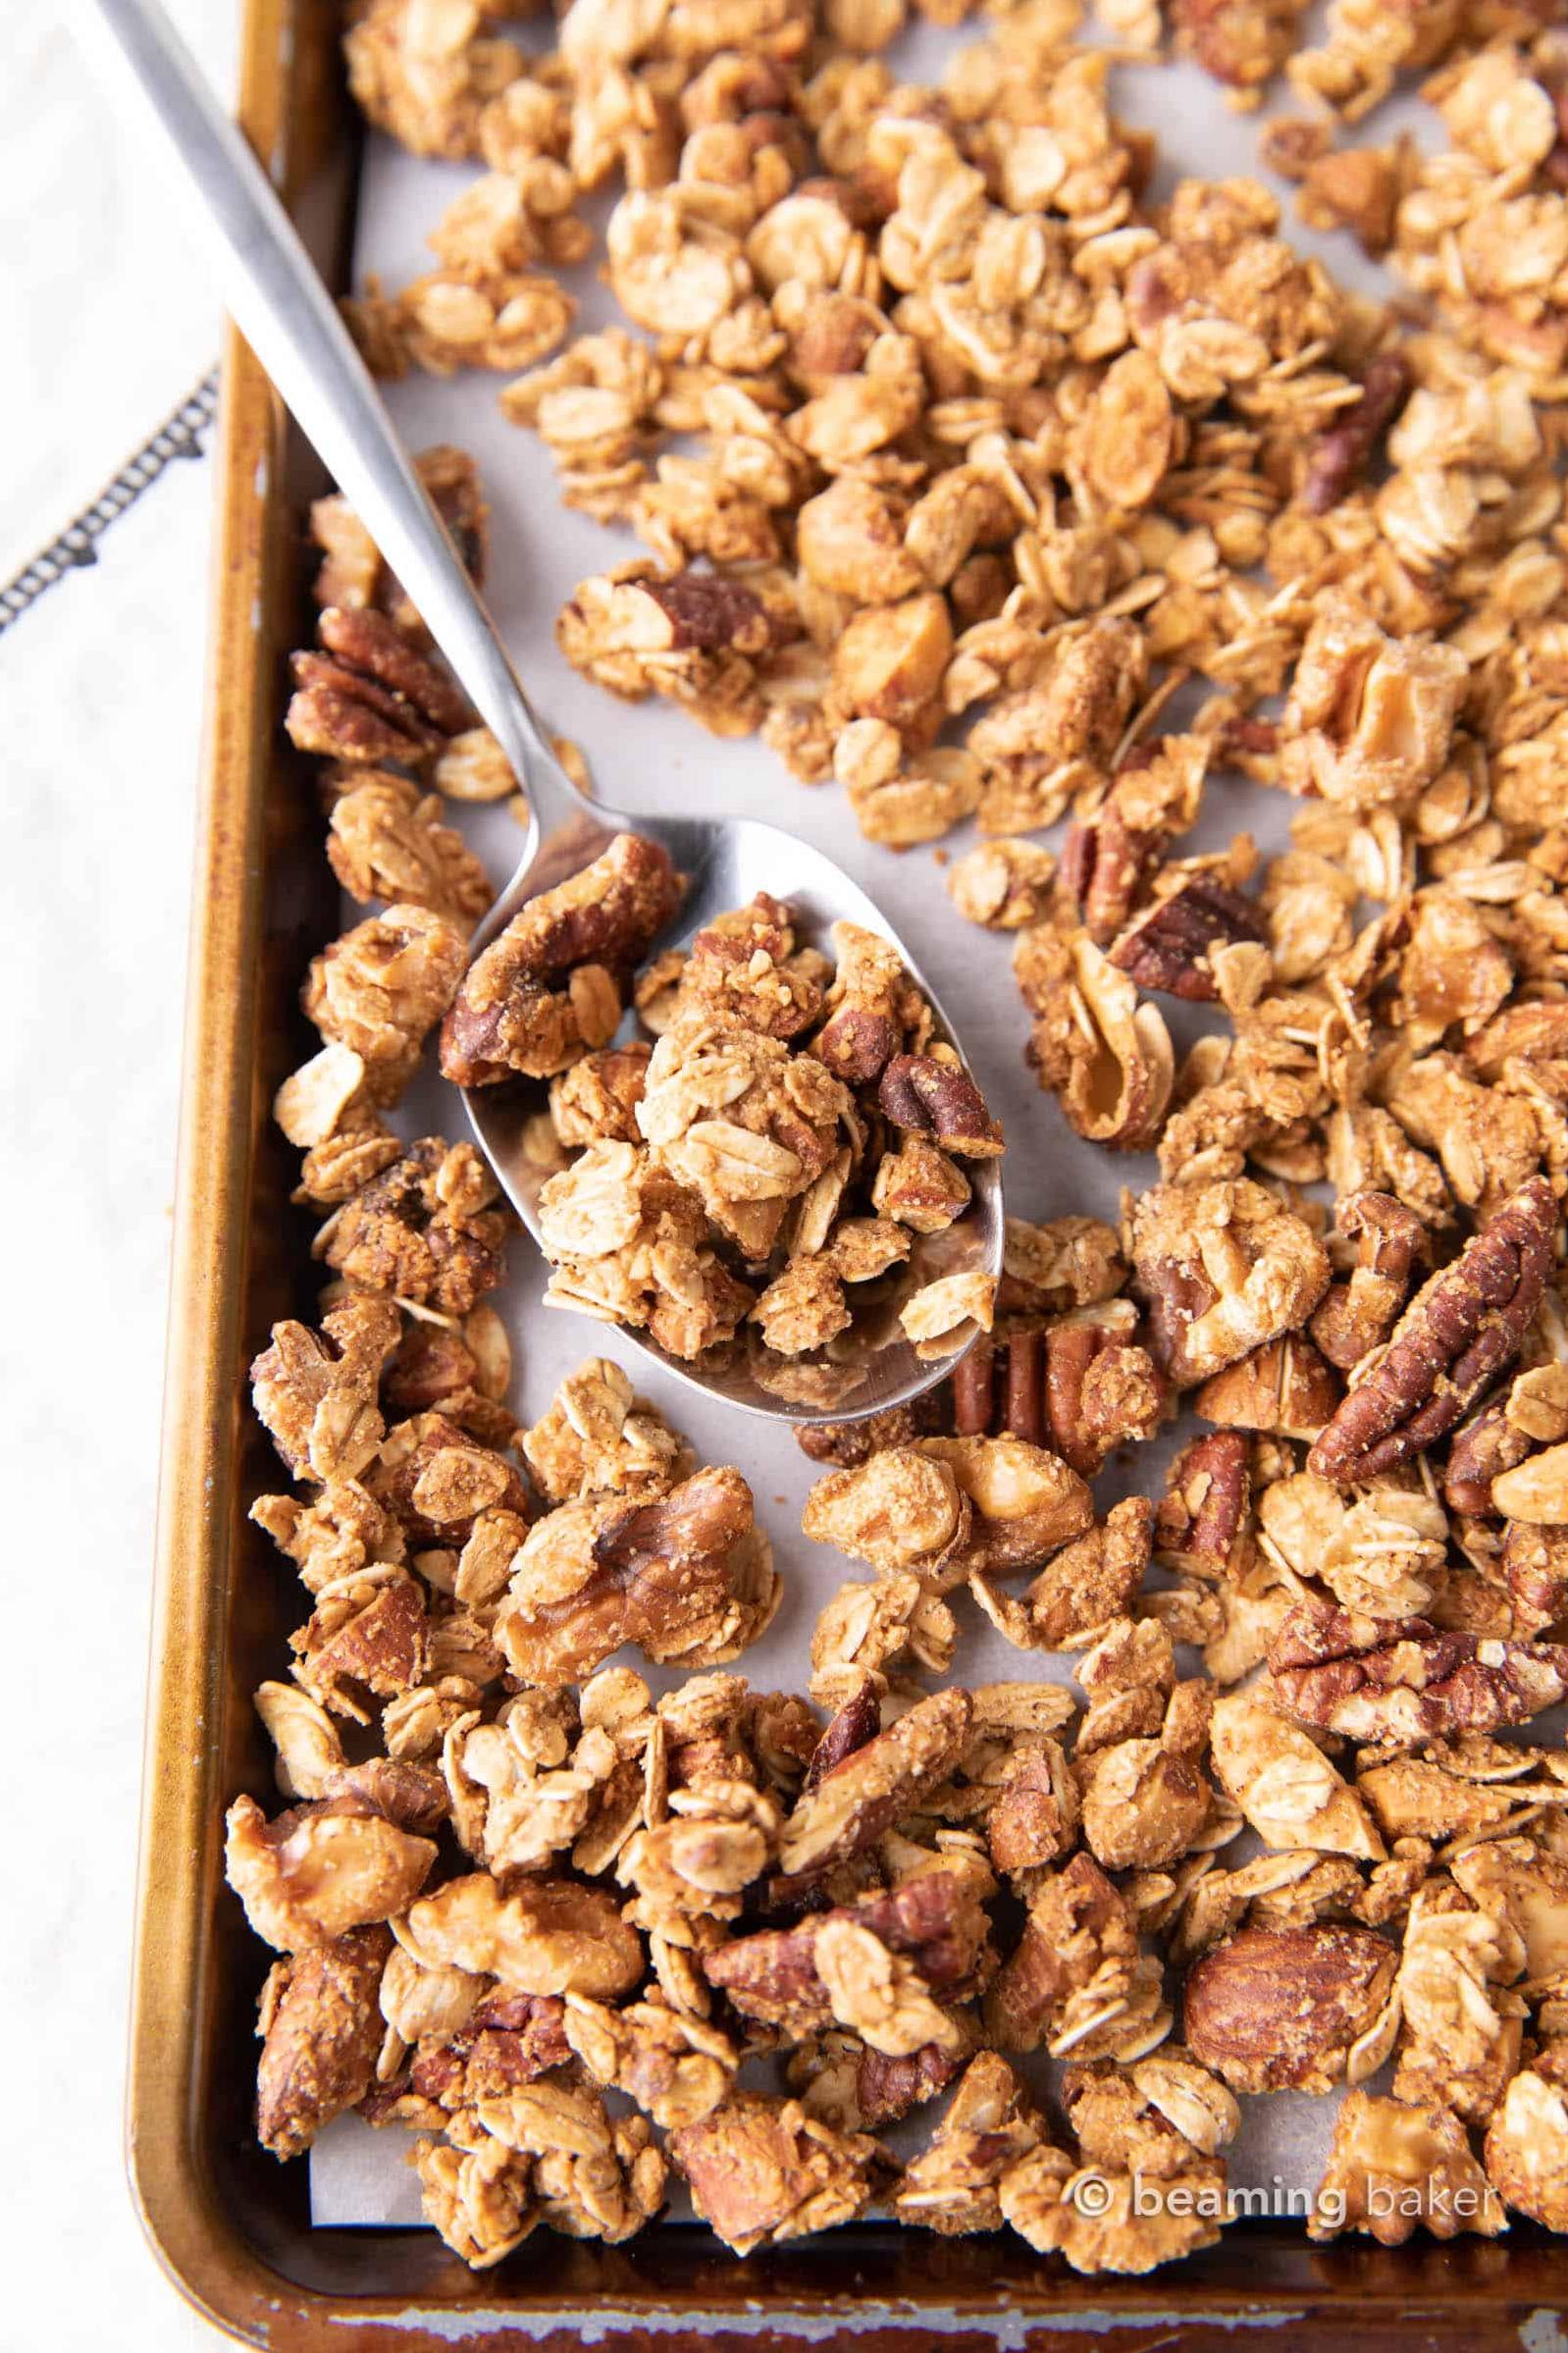  Say goodbye to processed granola and try making your own!